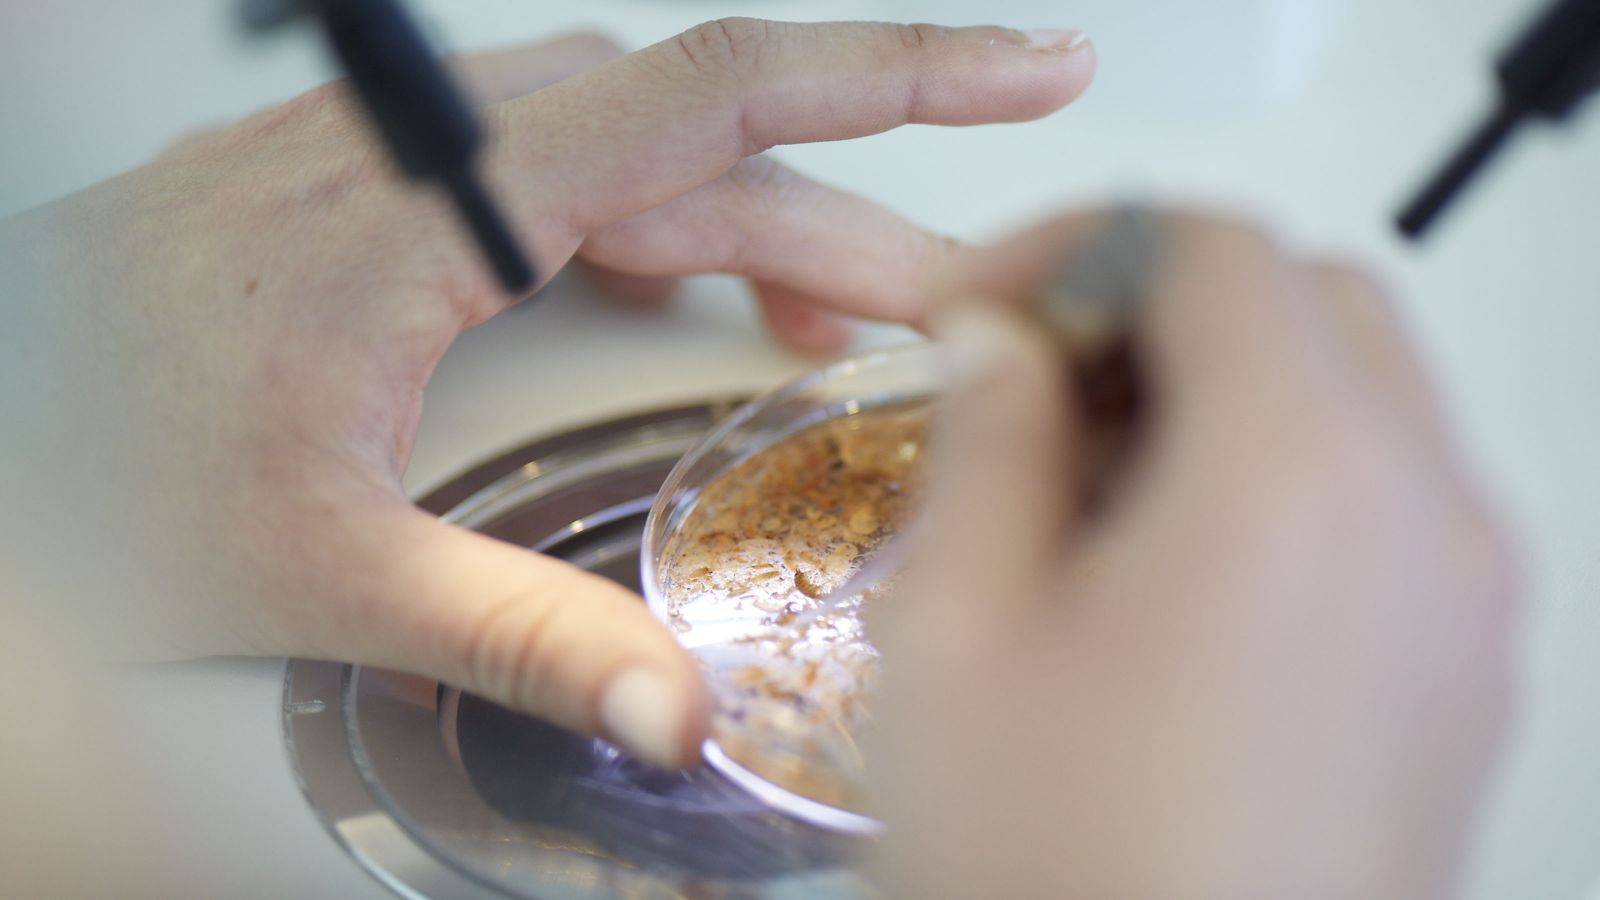 A close-up of hands using a small object to examine contents of a petri dish.